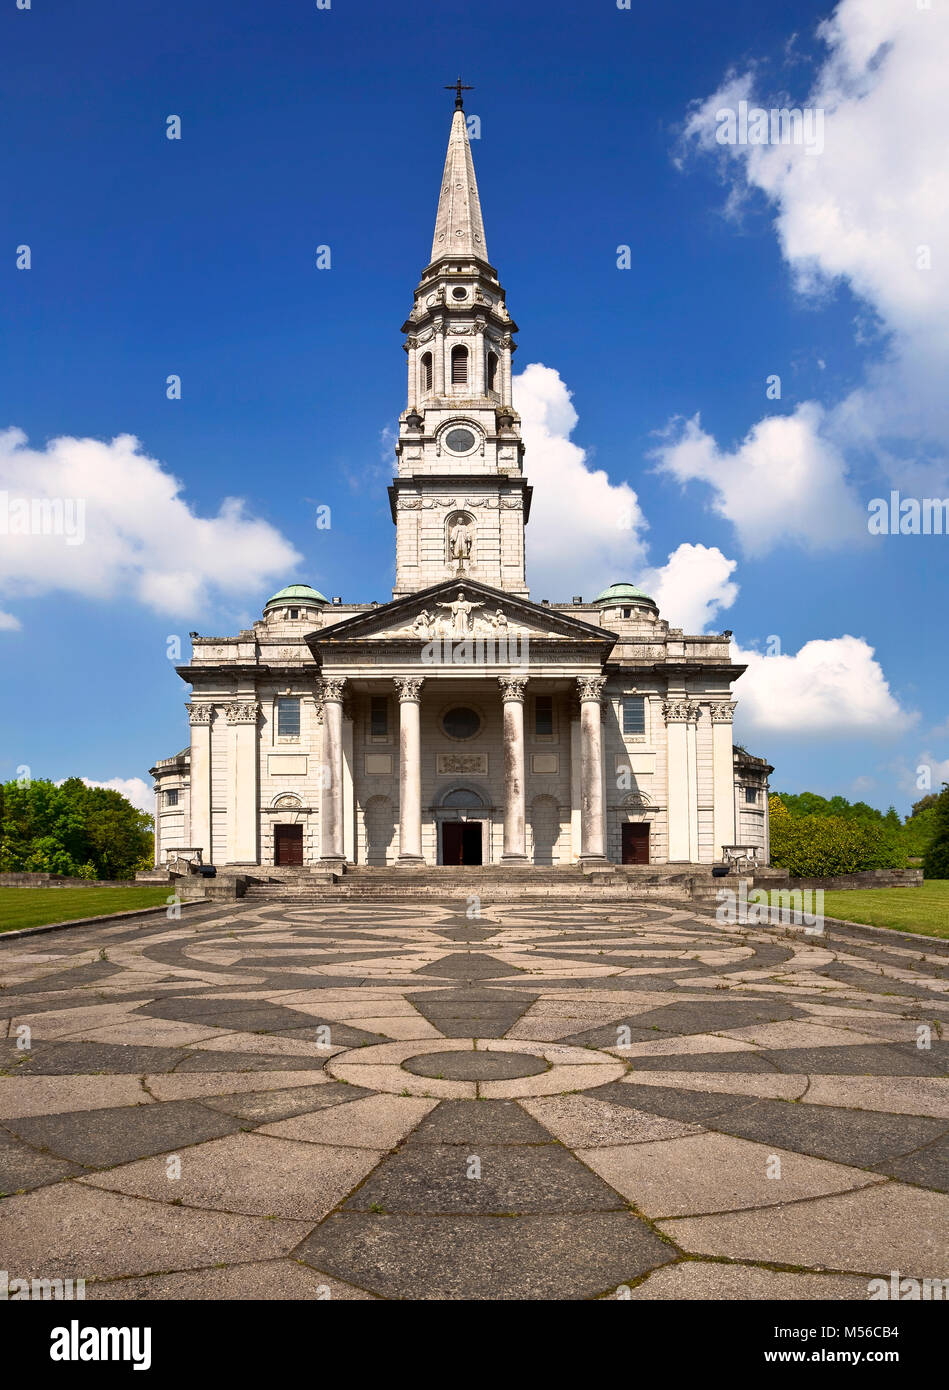 The Cathedral of Saint Patrick and Saint Felim, also known as Cavan Cathedral, was completed in 1942. The Roman Catholic cathedral is located in Cavan Stock Photo